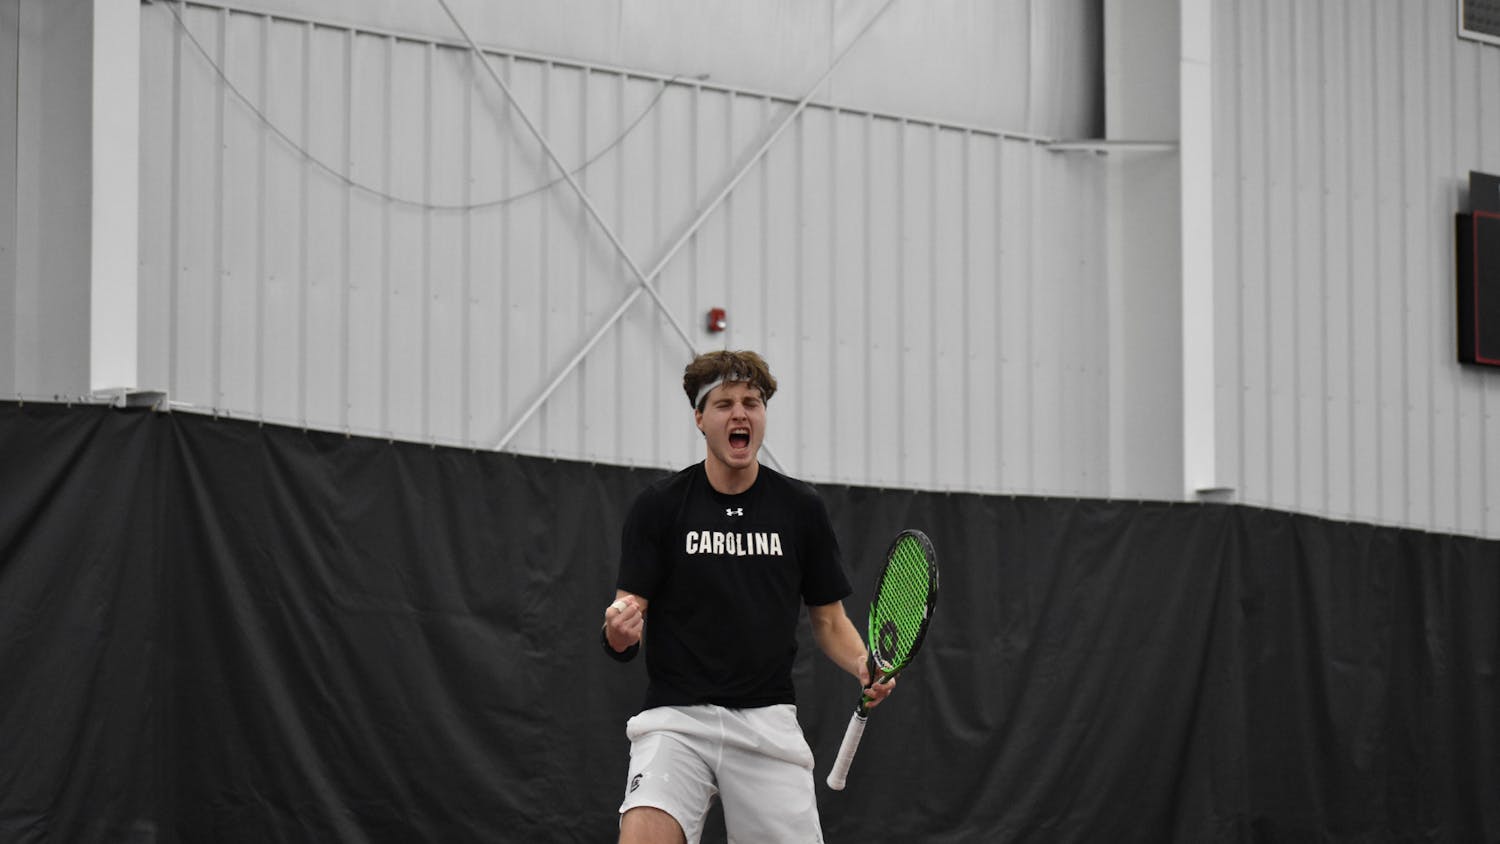 Junior Toby Samuel yells out in celebration after winning his singles game on day two of the ITA Kickoff Weekend event at the Carolina Indoor Tennis Center on Jan. 29, 2023. The South Carolina Gamecocks beat N.C. State 4-0, making it the winner of the ITA tournament.&nbsp;